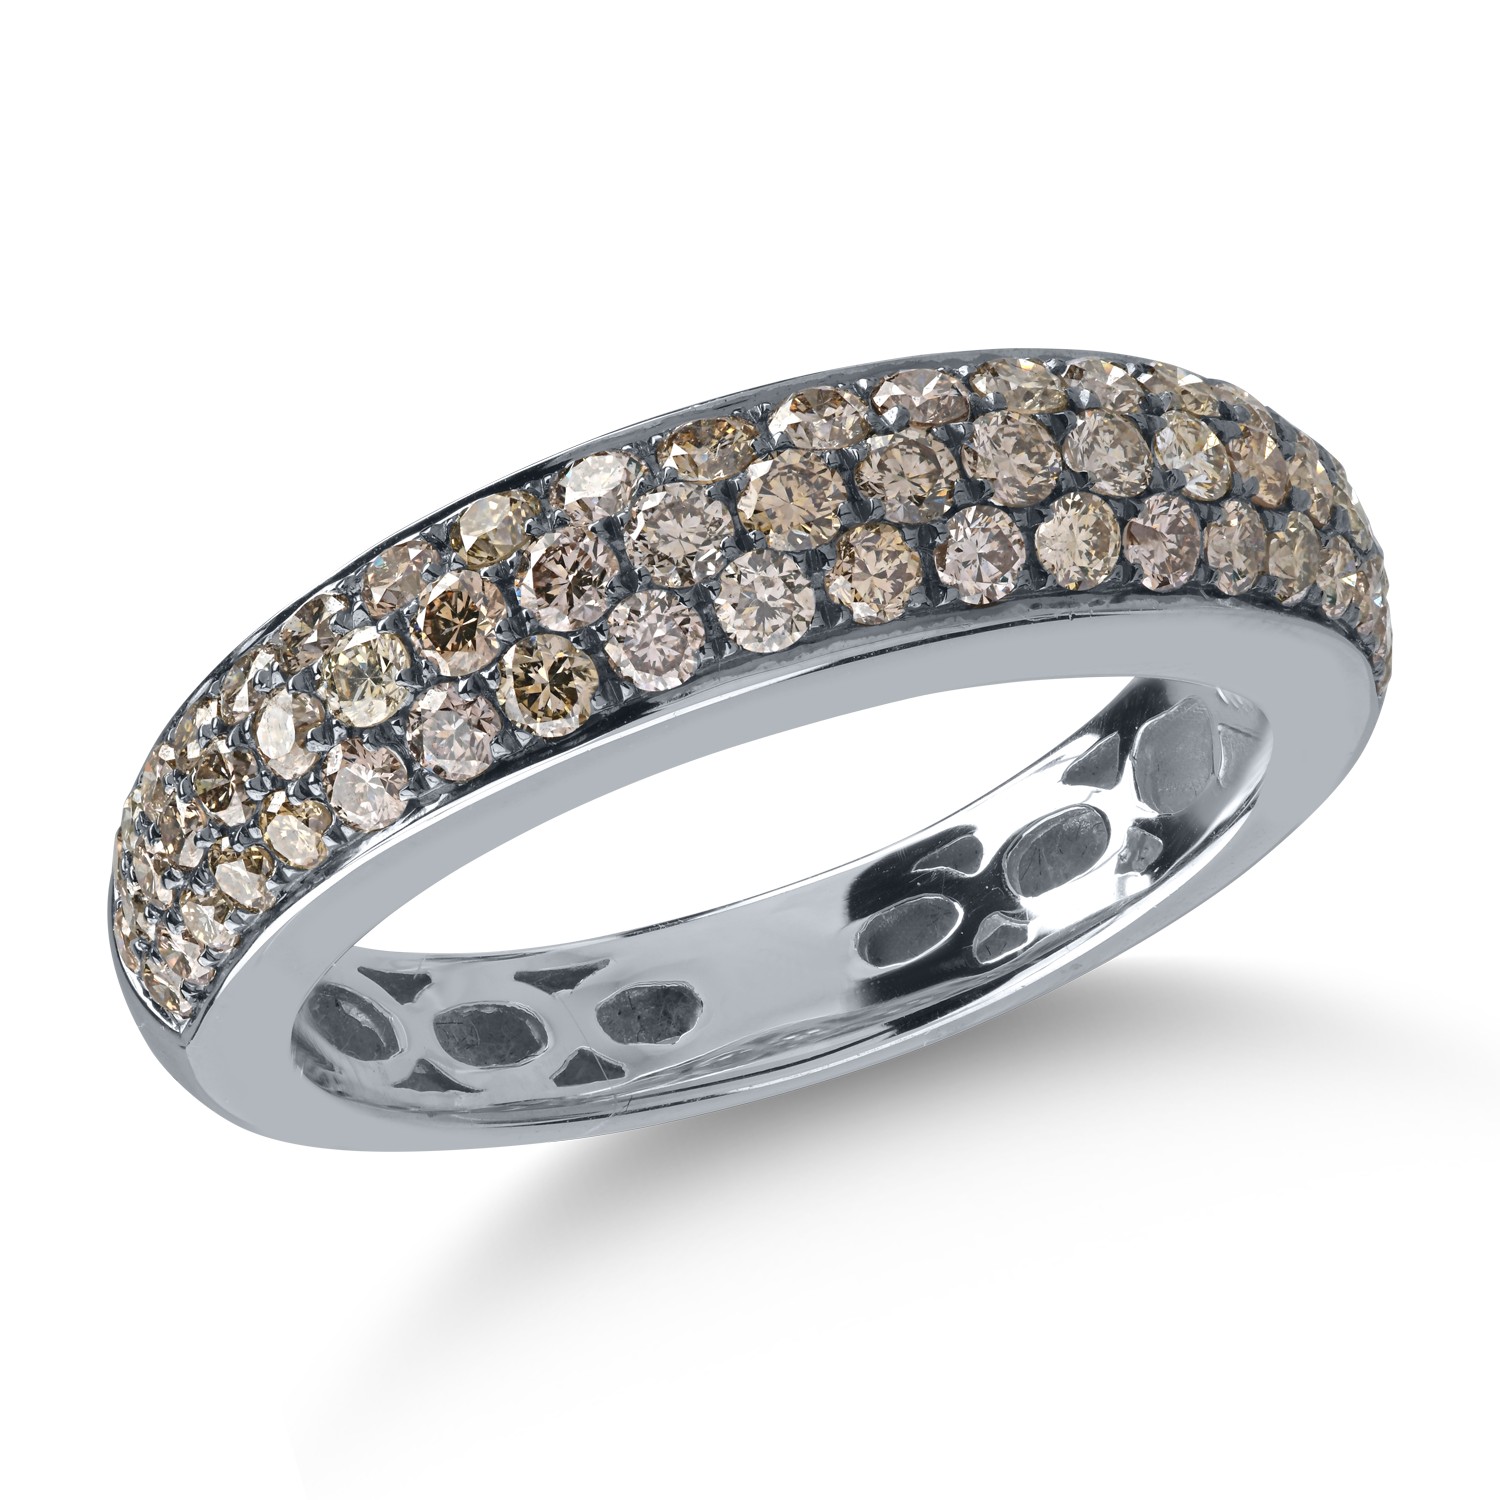 Half eternity ring in white gold ring with 0.96ct brown diamonds